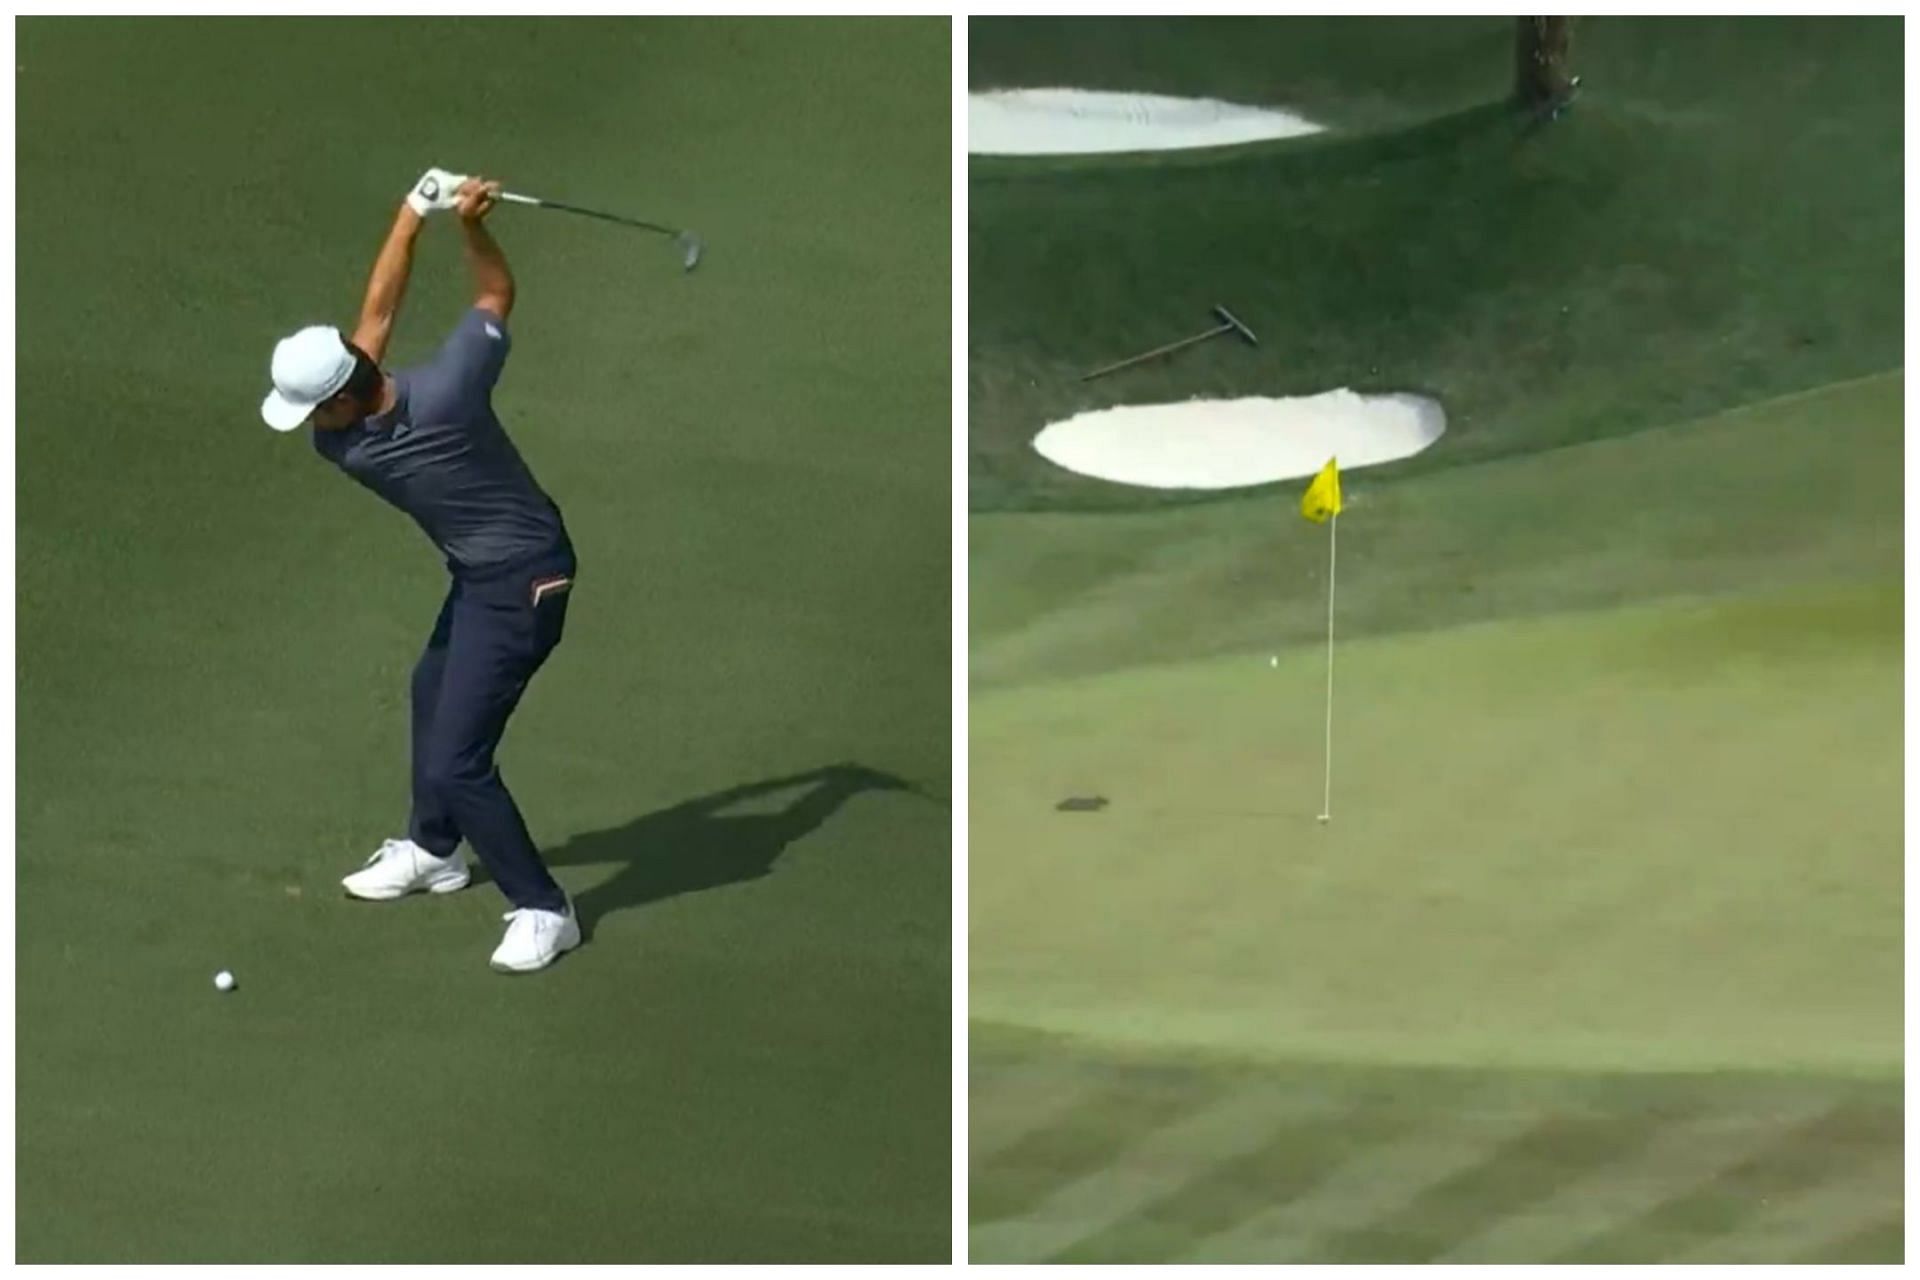 Brandon Wu missed an albatross during the second round of the Players Championship